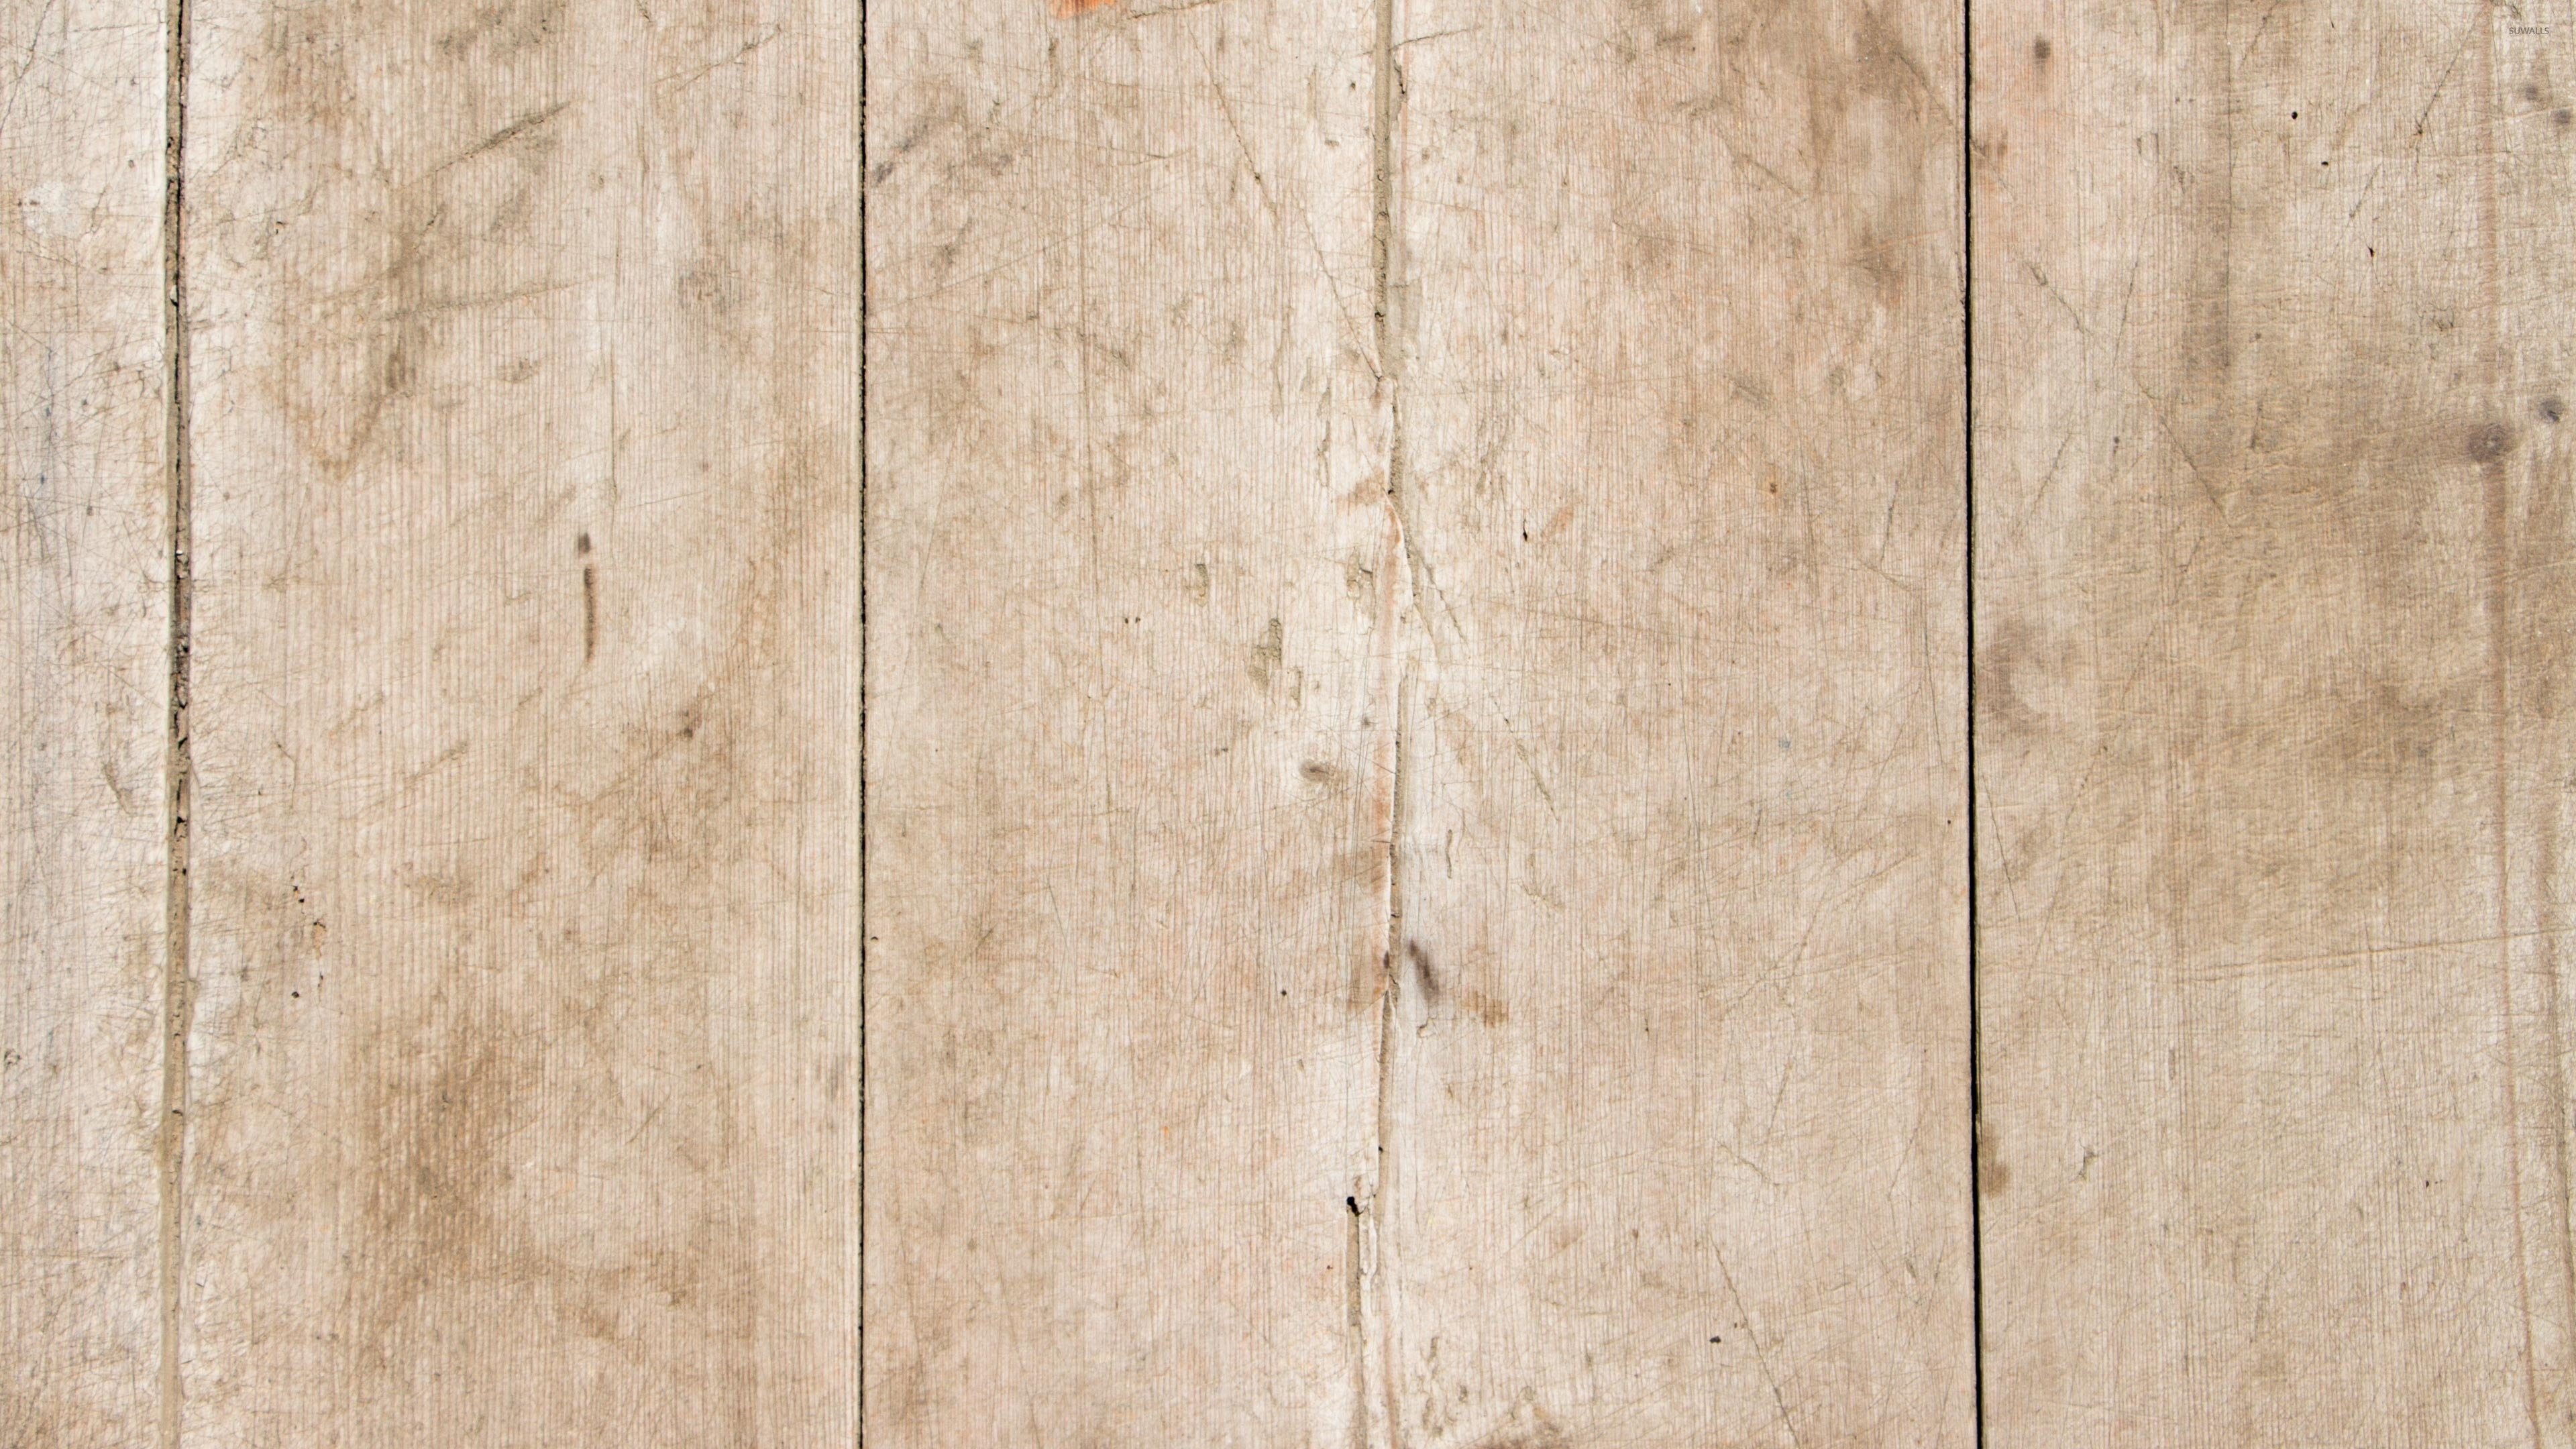 Scrapped wood, Worn-out texture, Old-fashioned, Distressed, 3840x2160 4K Desktop